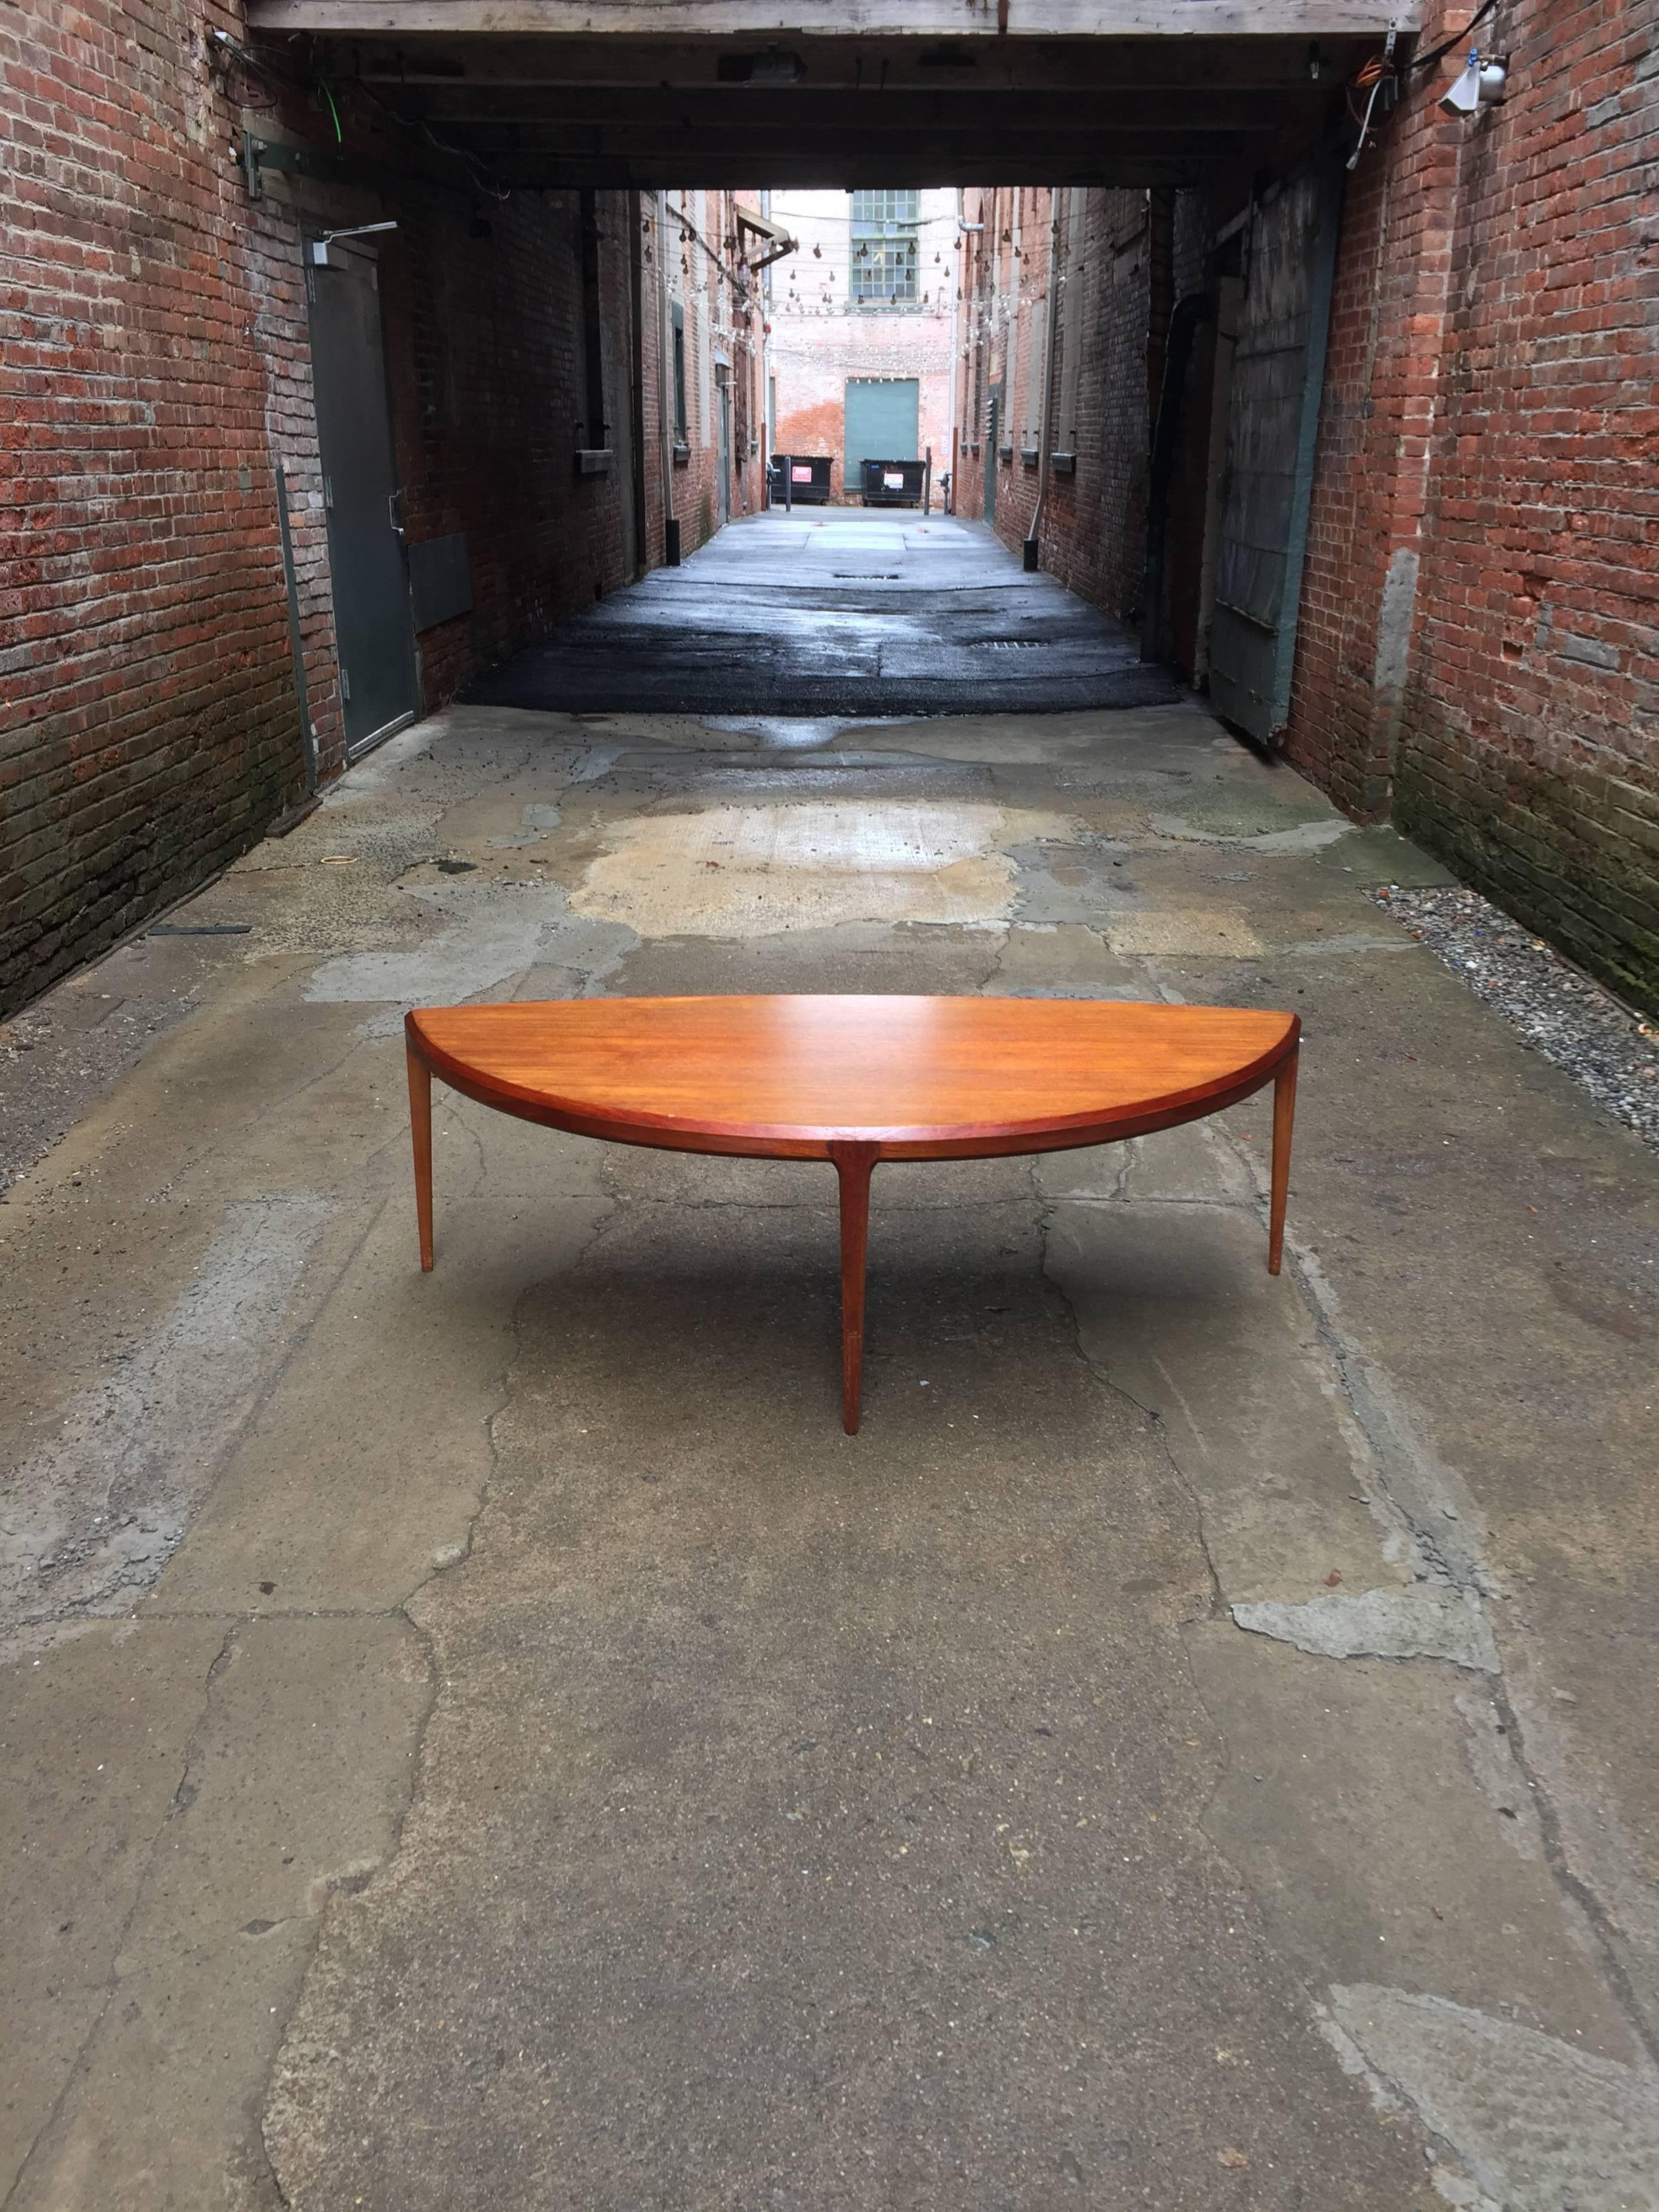 Tapered legs, beveled edge and exquisite teak top design by Johannes Andersen for CFC Silkeborg, Denmark. The table also features a wonderful curvilinear form supported by three legs. The table definitely has presence. Fully signed with enamel